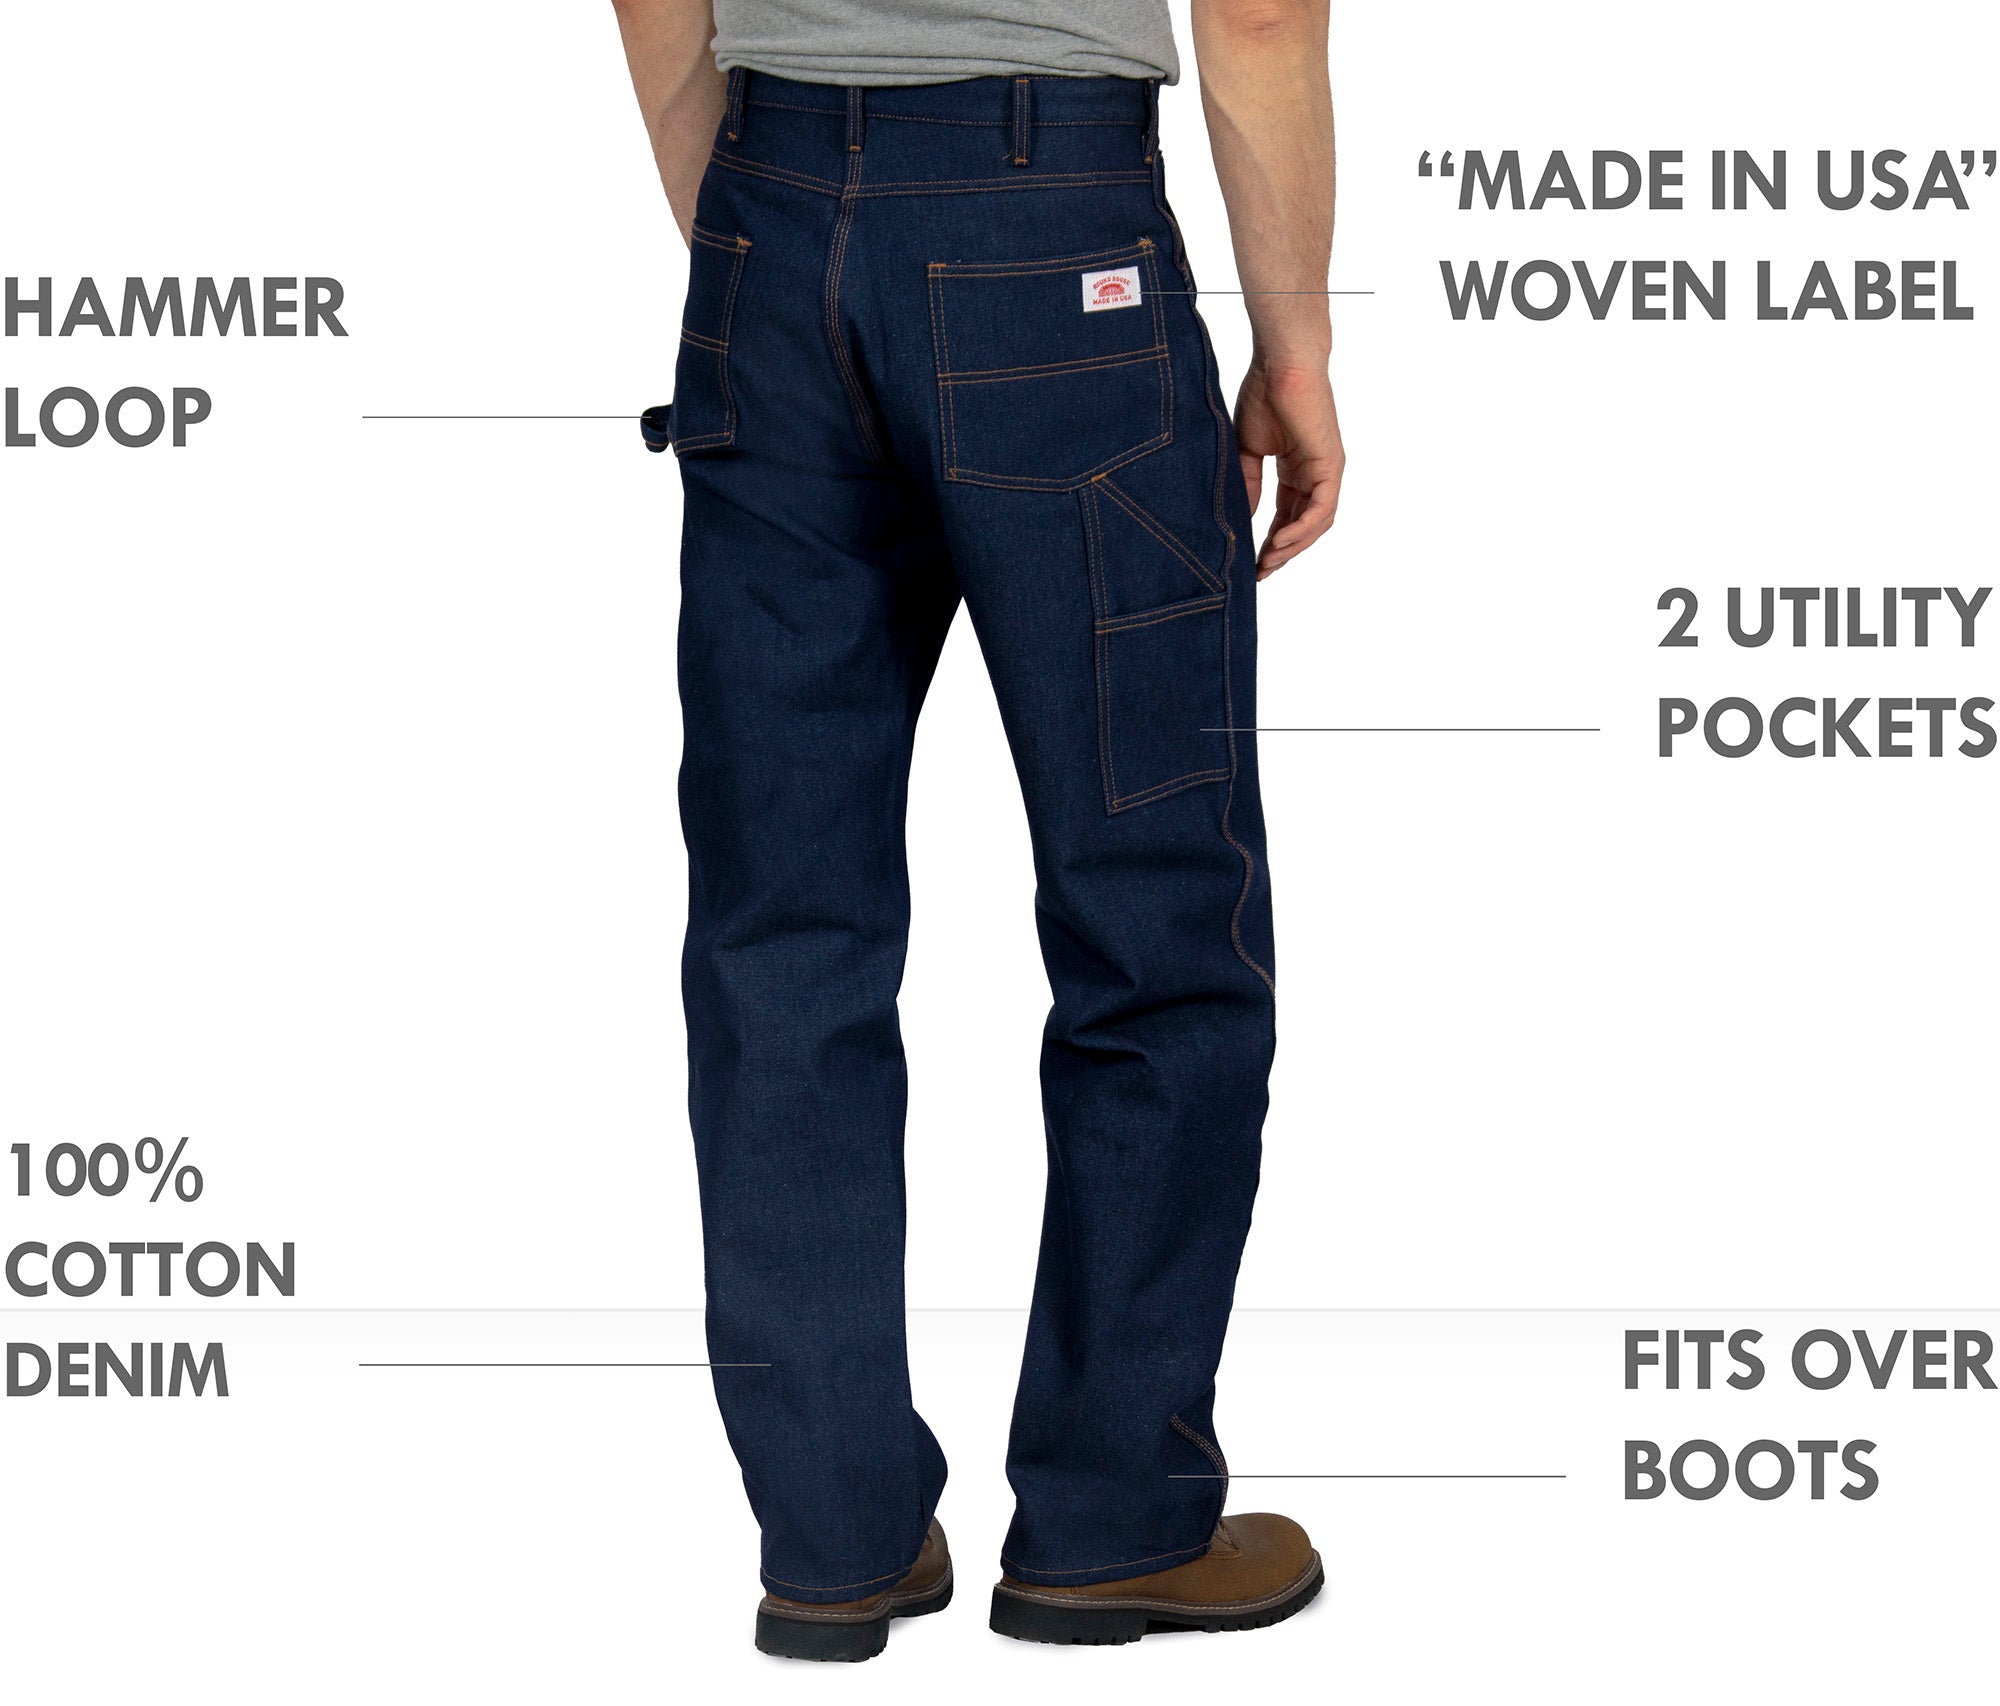 The last true Vintage Jeans made in the USA | Craftsmanship Magazine